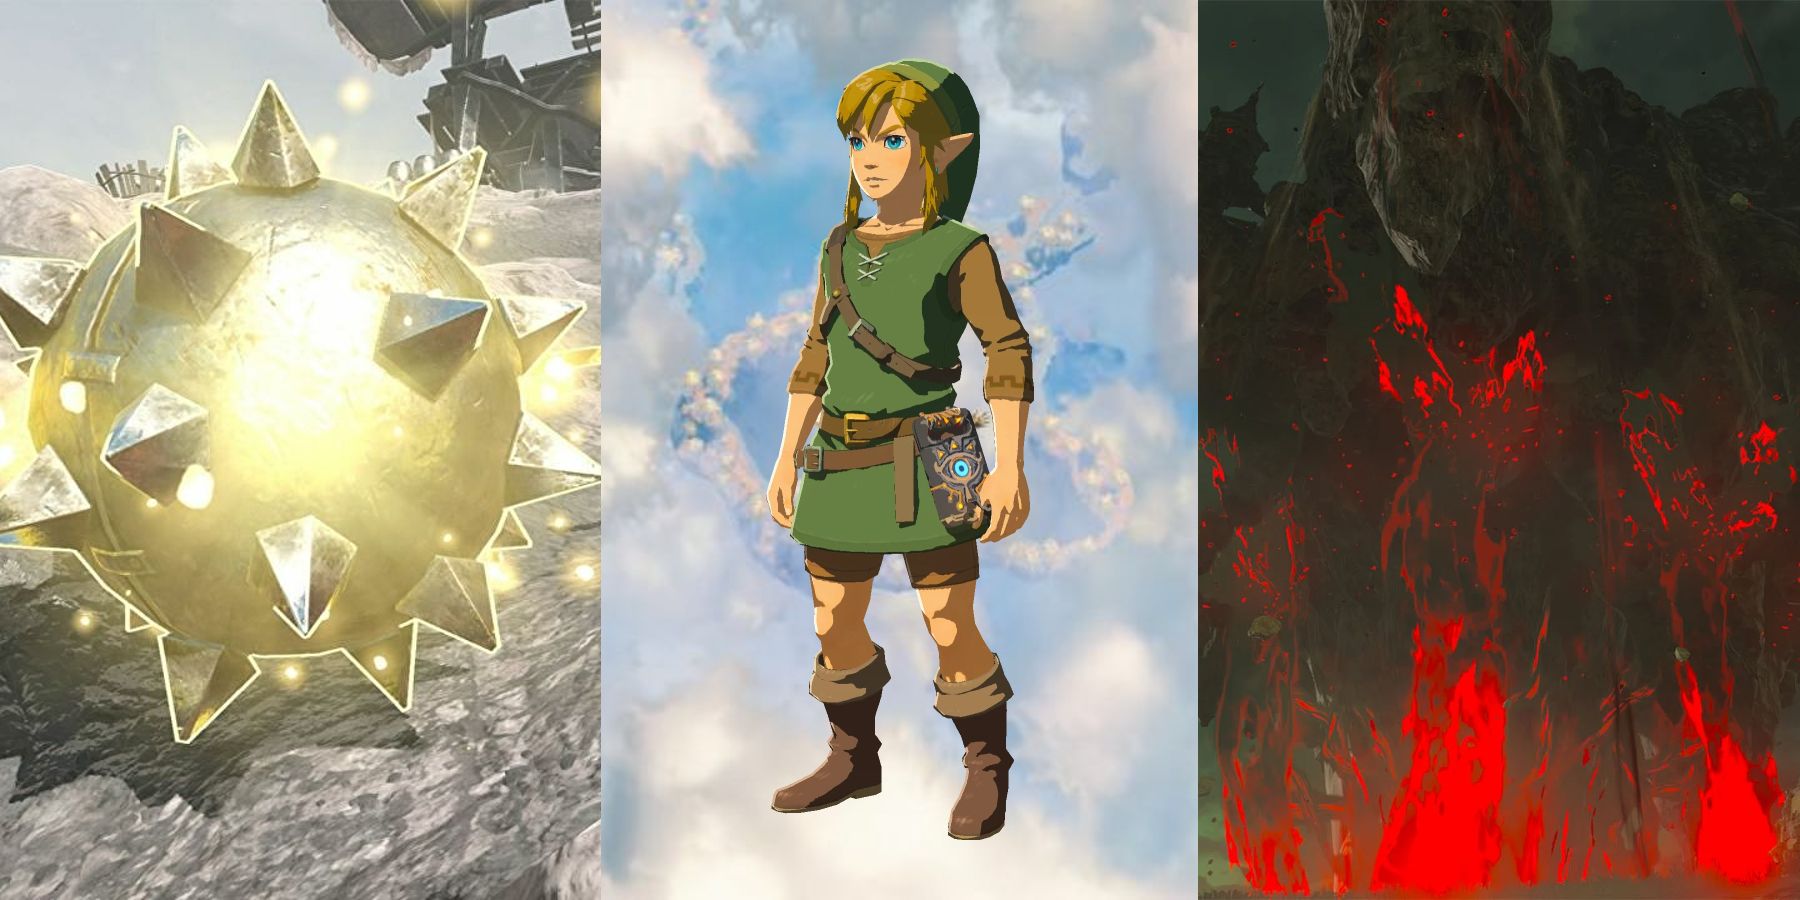 Zelda: Breath of the Wild 2 Could Do More with Link's Armor of the Wild